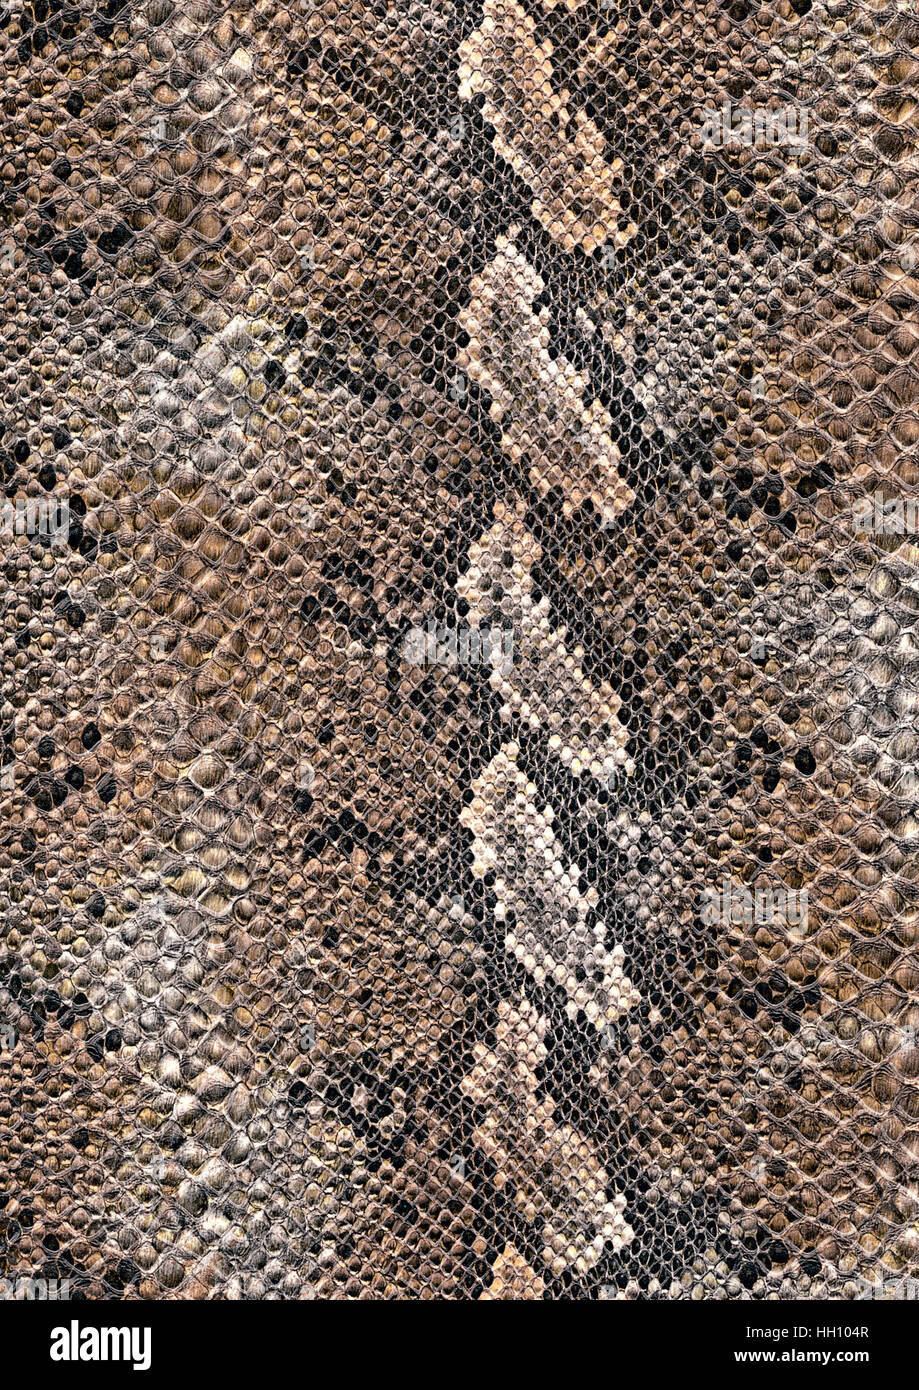 full frame scaled abstract brown patterned reptile skin surface Stock Photo